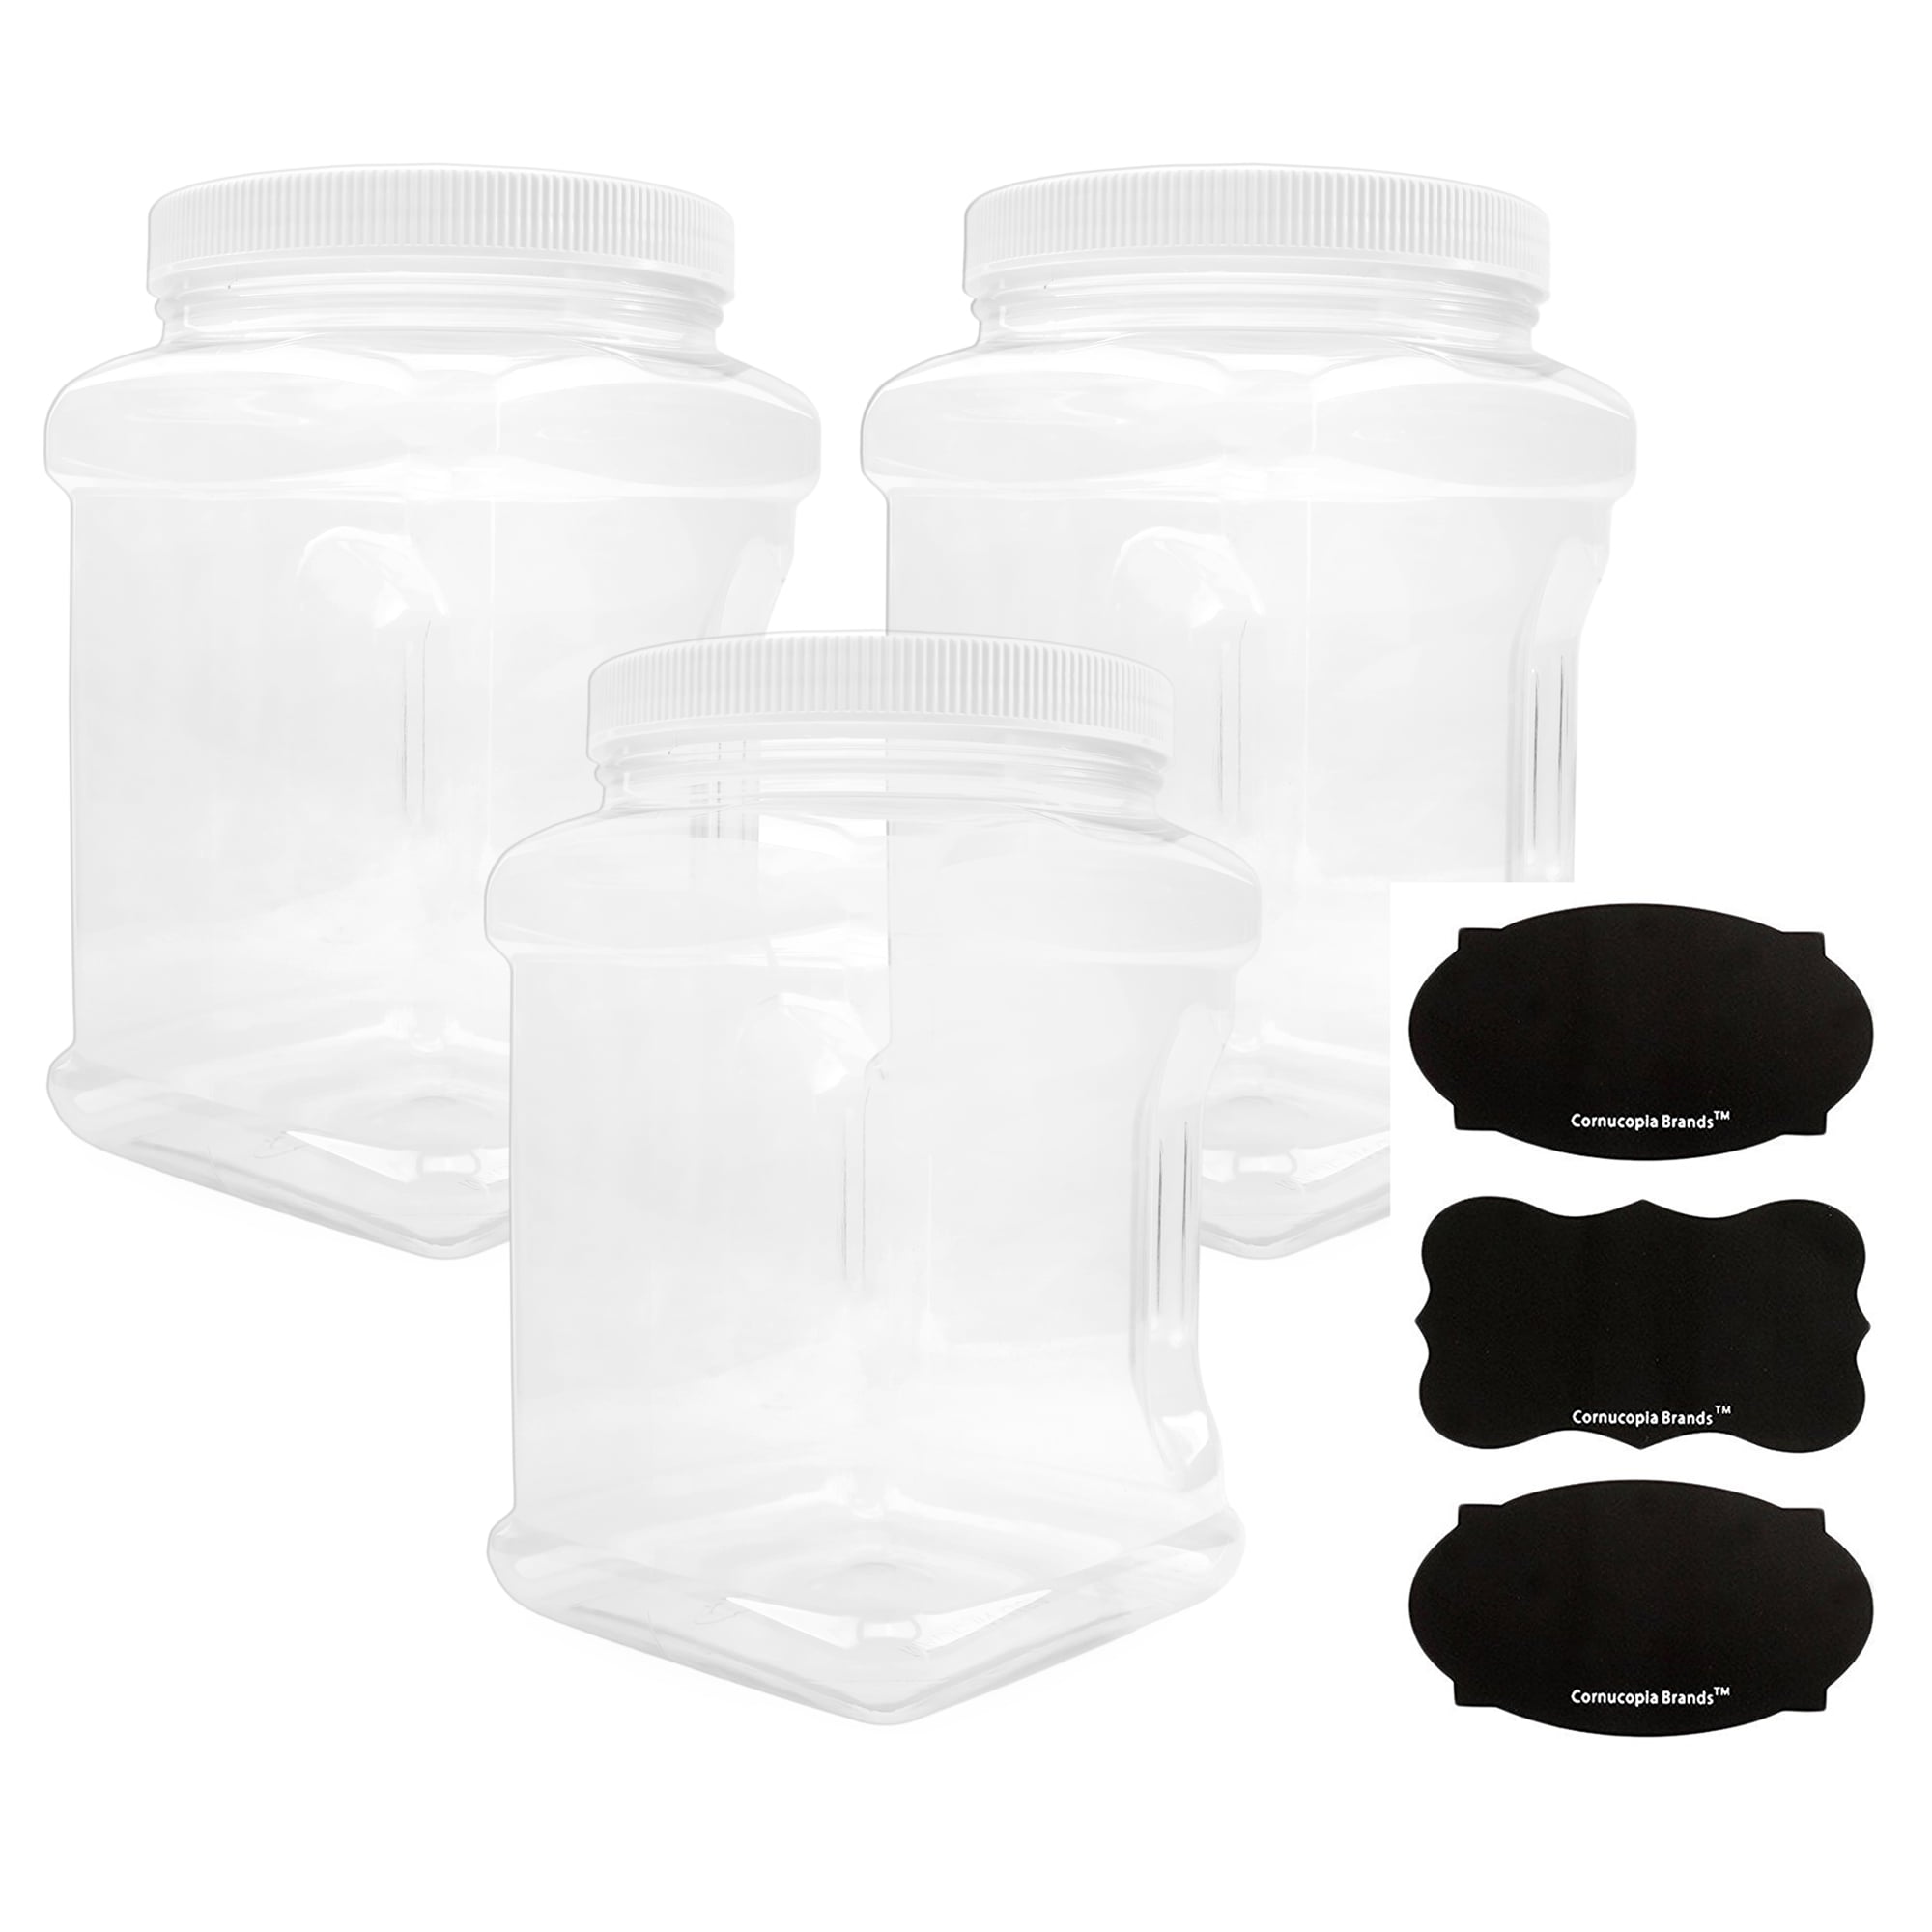 ljdeals 1/2 Gallon 64 oz Clear Plastic Jars with Lids, Large Jars, Wide  Mouth Storage Containers, Pack of 3, BPA Free, Food Safe, made in USA